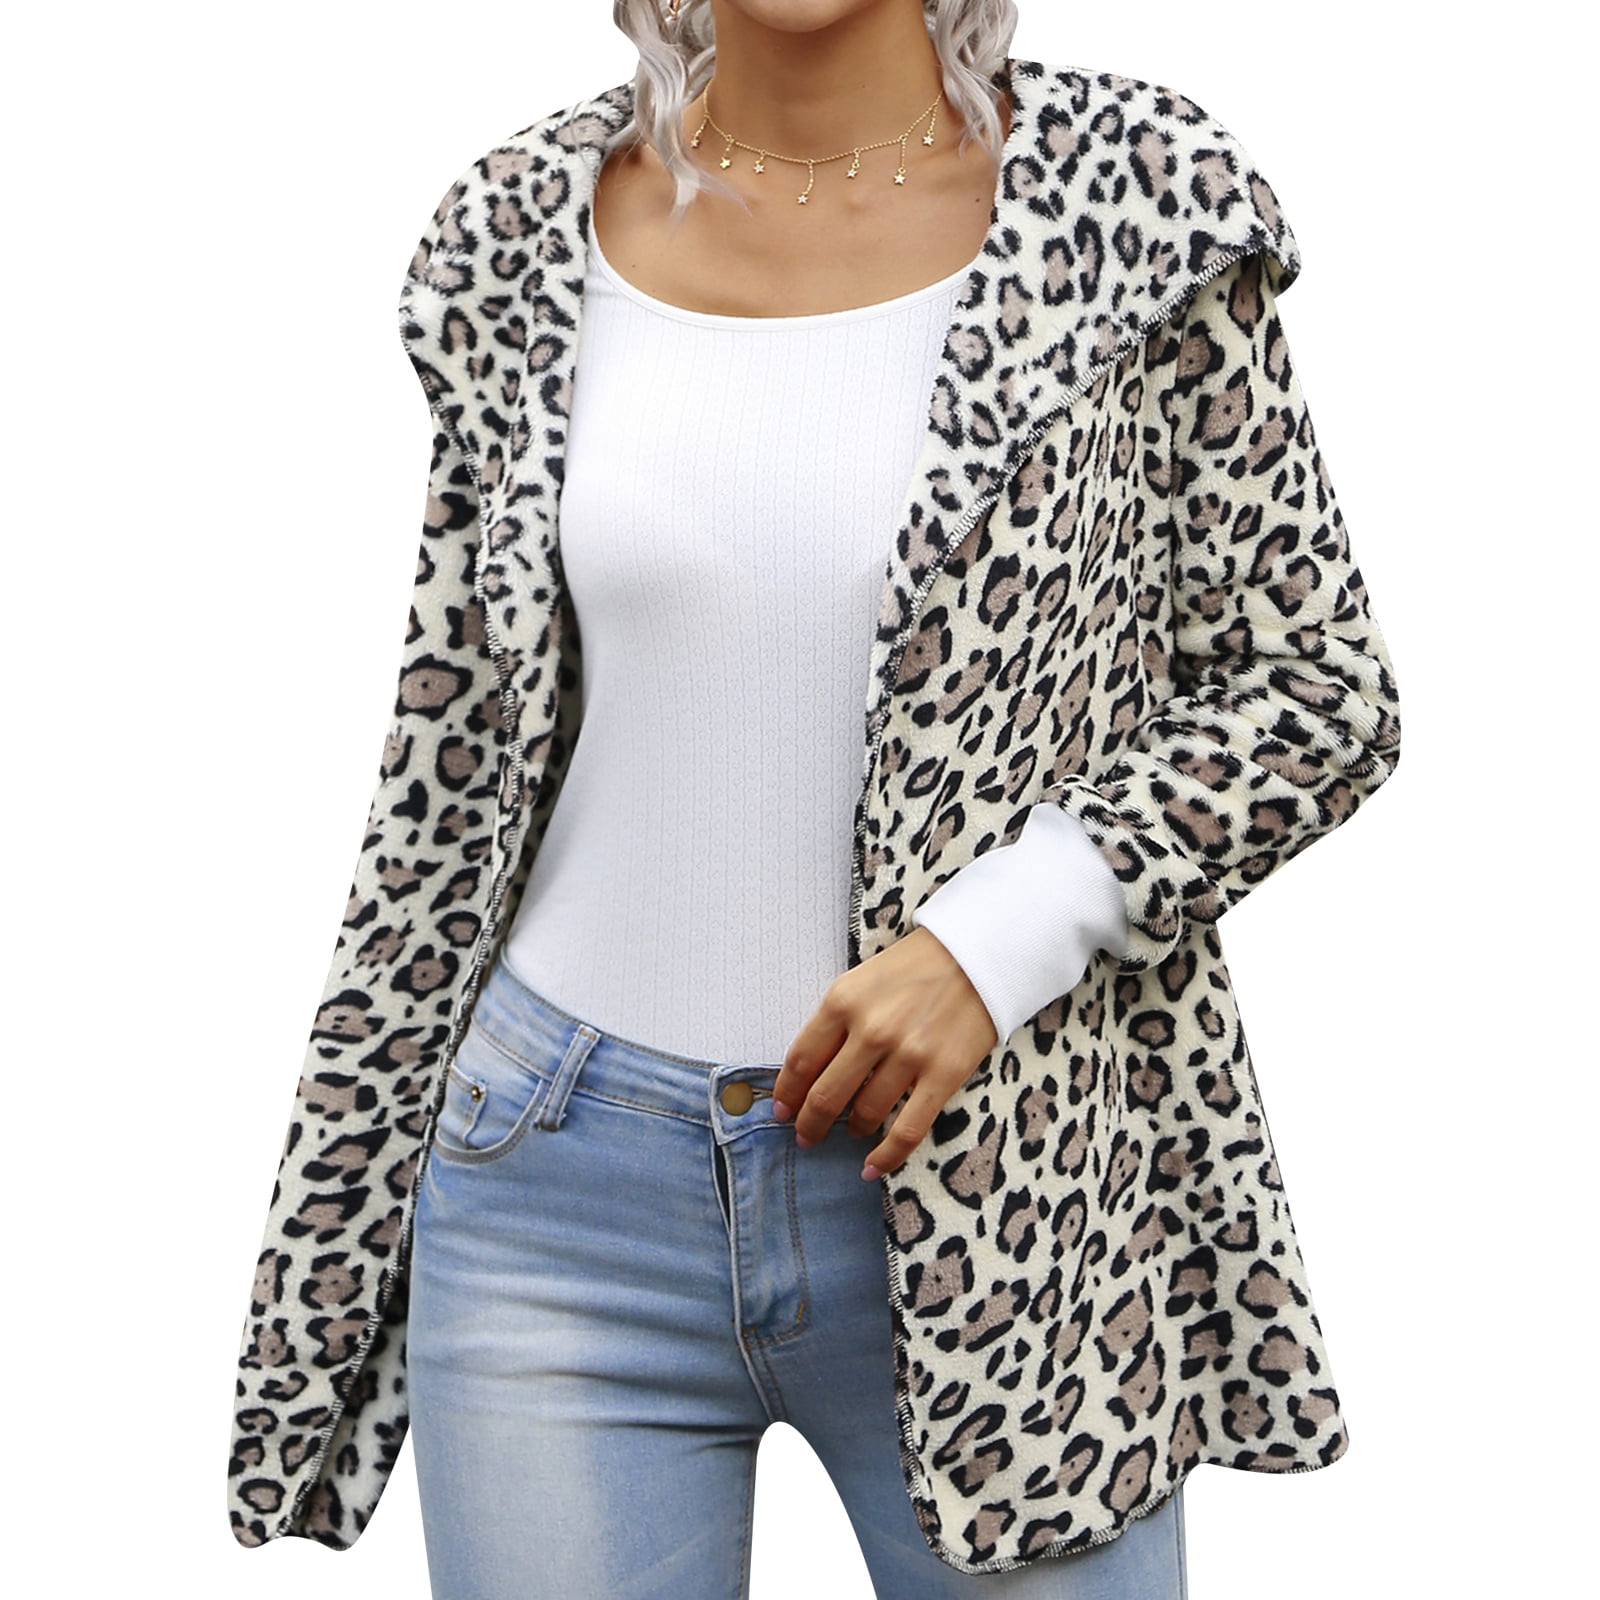 XL CHICO'S NEW $46 Long Sleeve Animal Print Essential Layer Top 3